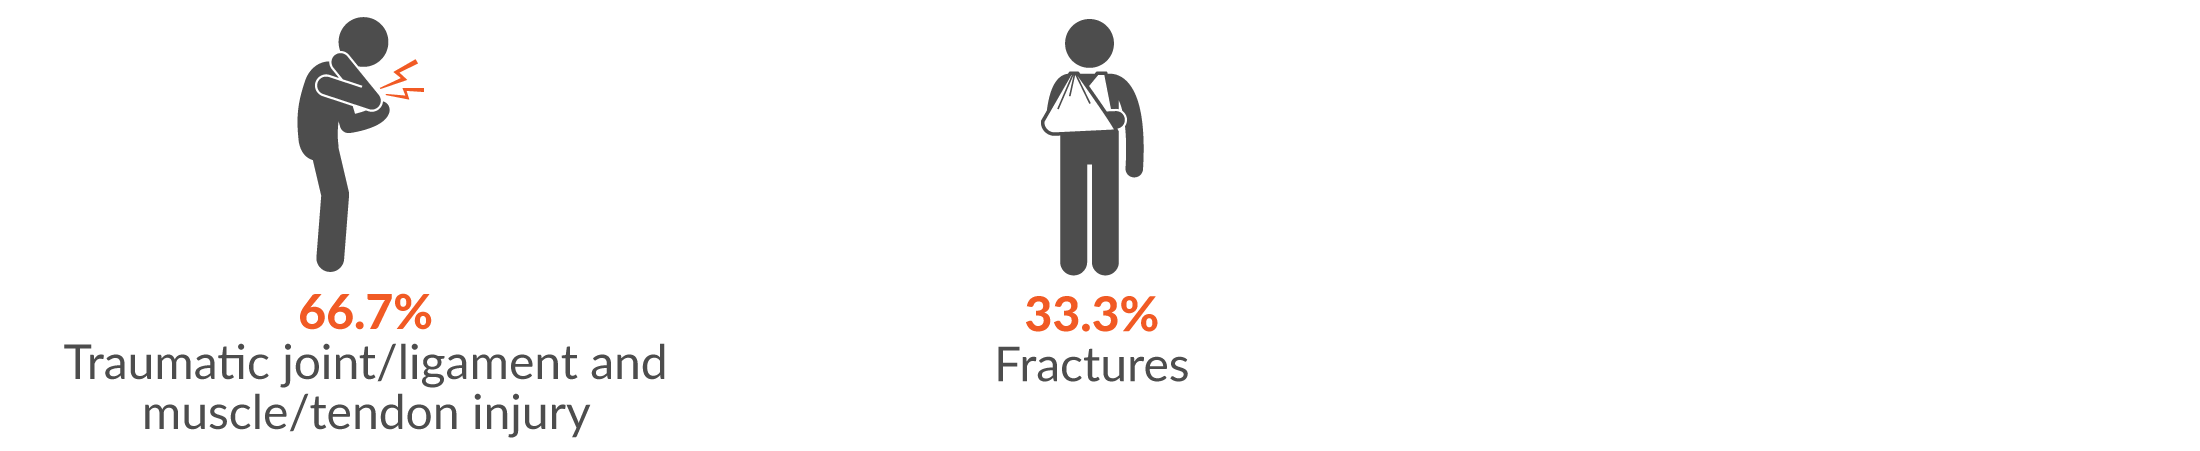 This infographic shows the main two injury groups resulting from falls, slips and trips of a person were 66.7% traumatic joint/ligament and muscle/tendon injury; and 33.3% fractures.